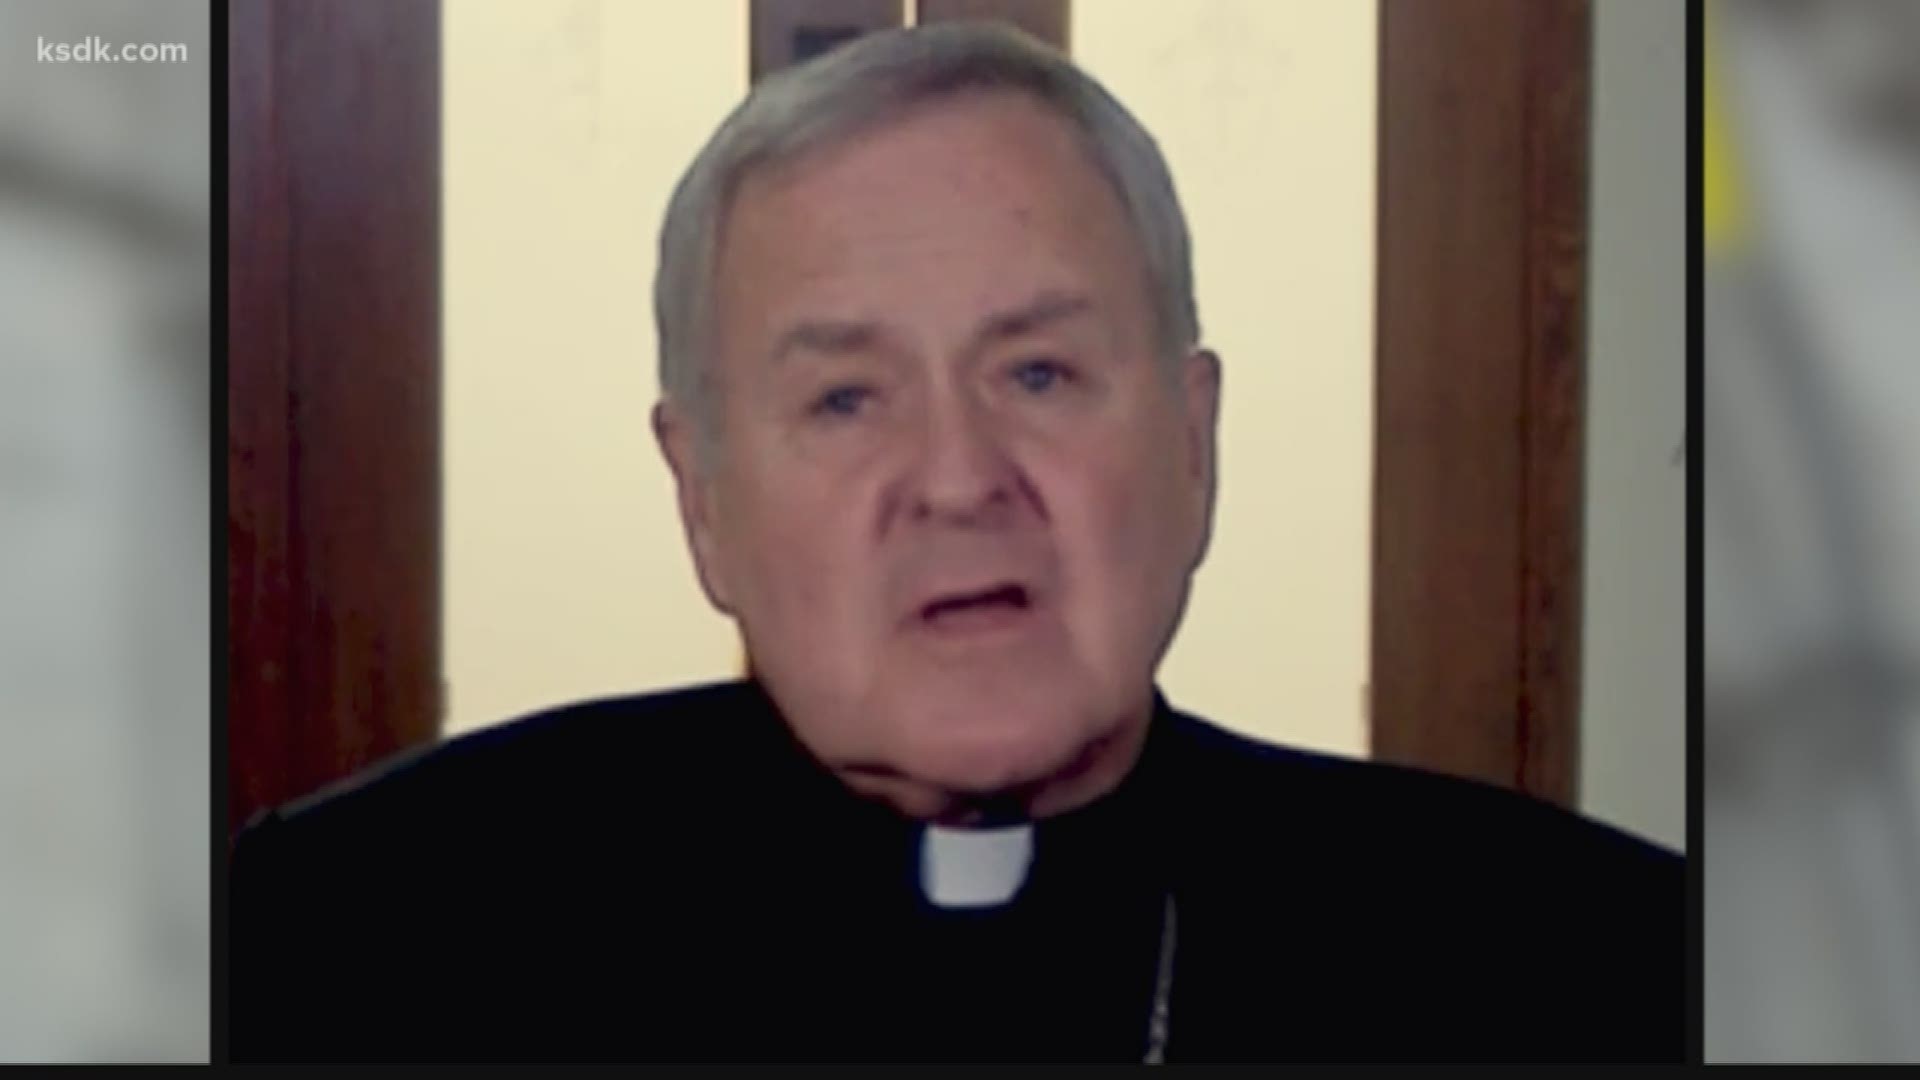 Archbishop Robert J. Carlson talked about the difficult decisions to cancel Holy Week Masses and close parish schools